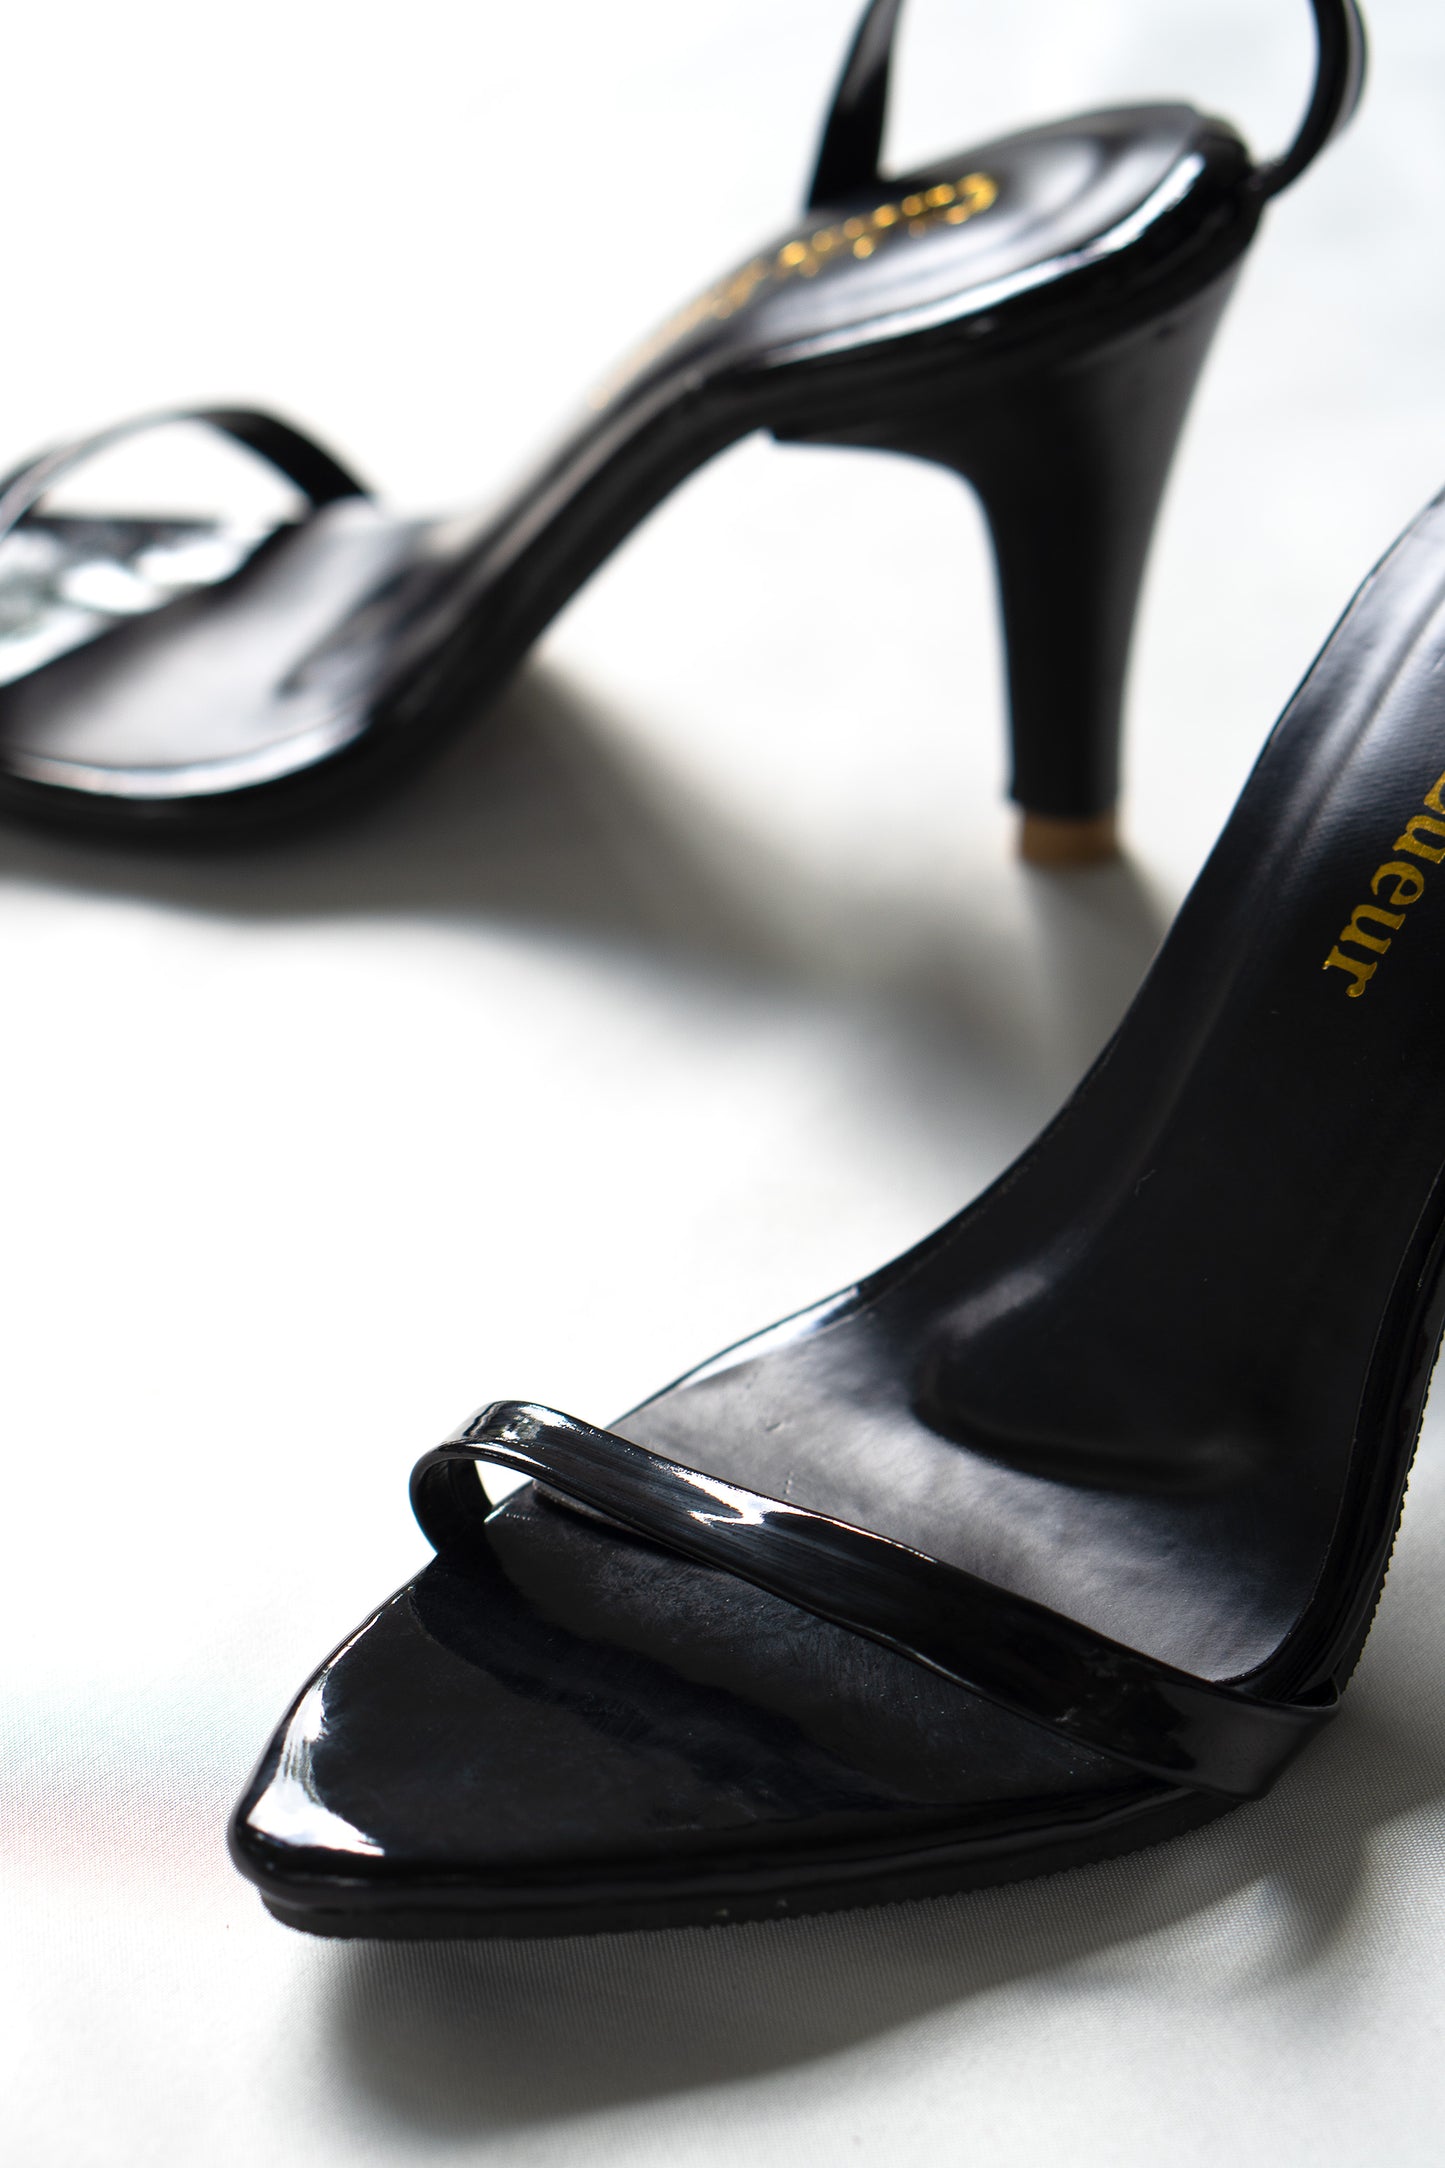 Sophisticated black heel with a 3-inch lift